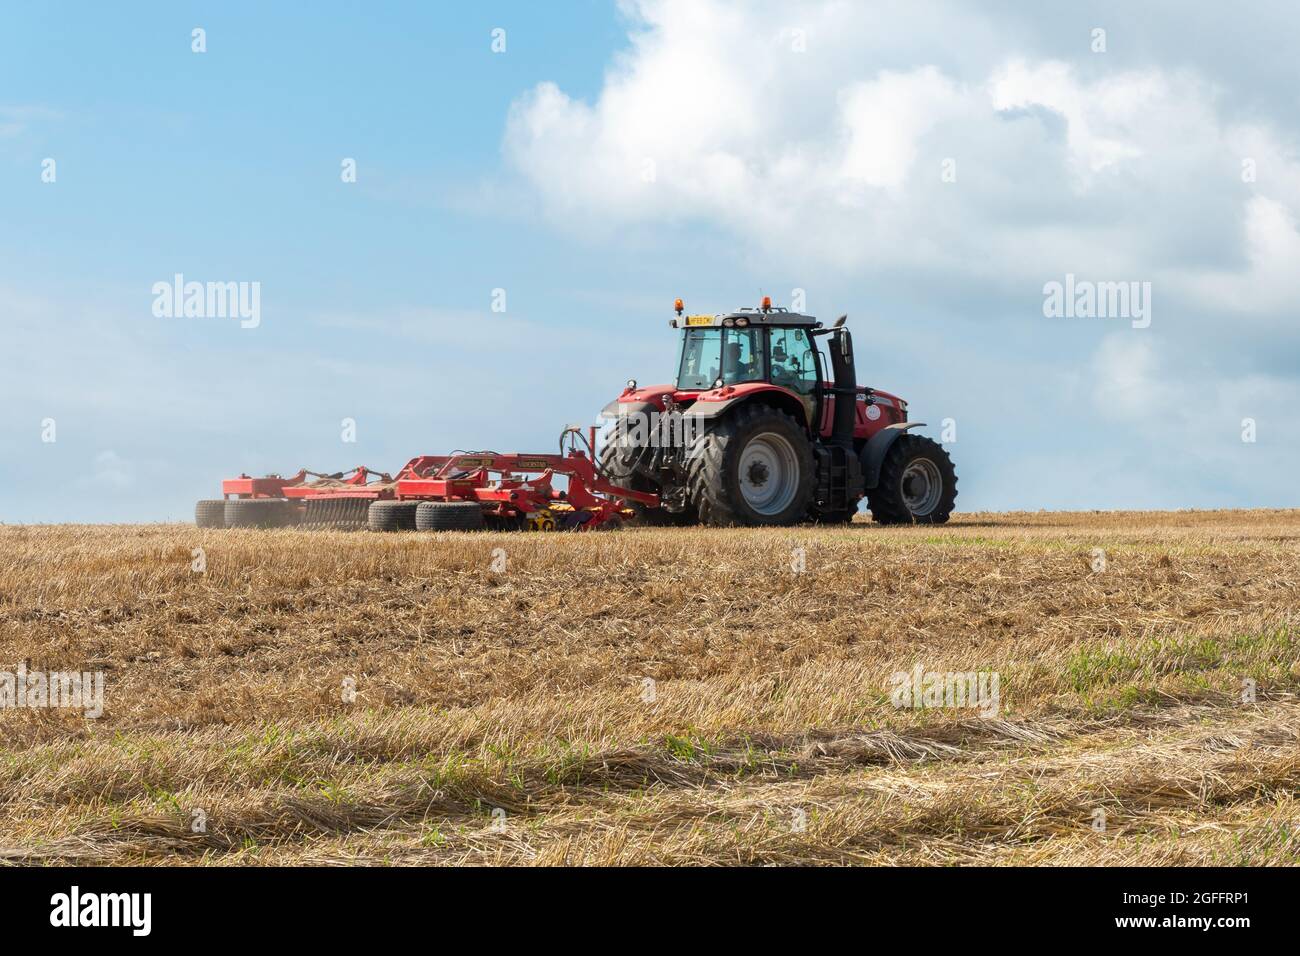 Red Massey Ferguson tractor working in a corn field during summer, West Sussex, England, UK Stock Photo